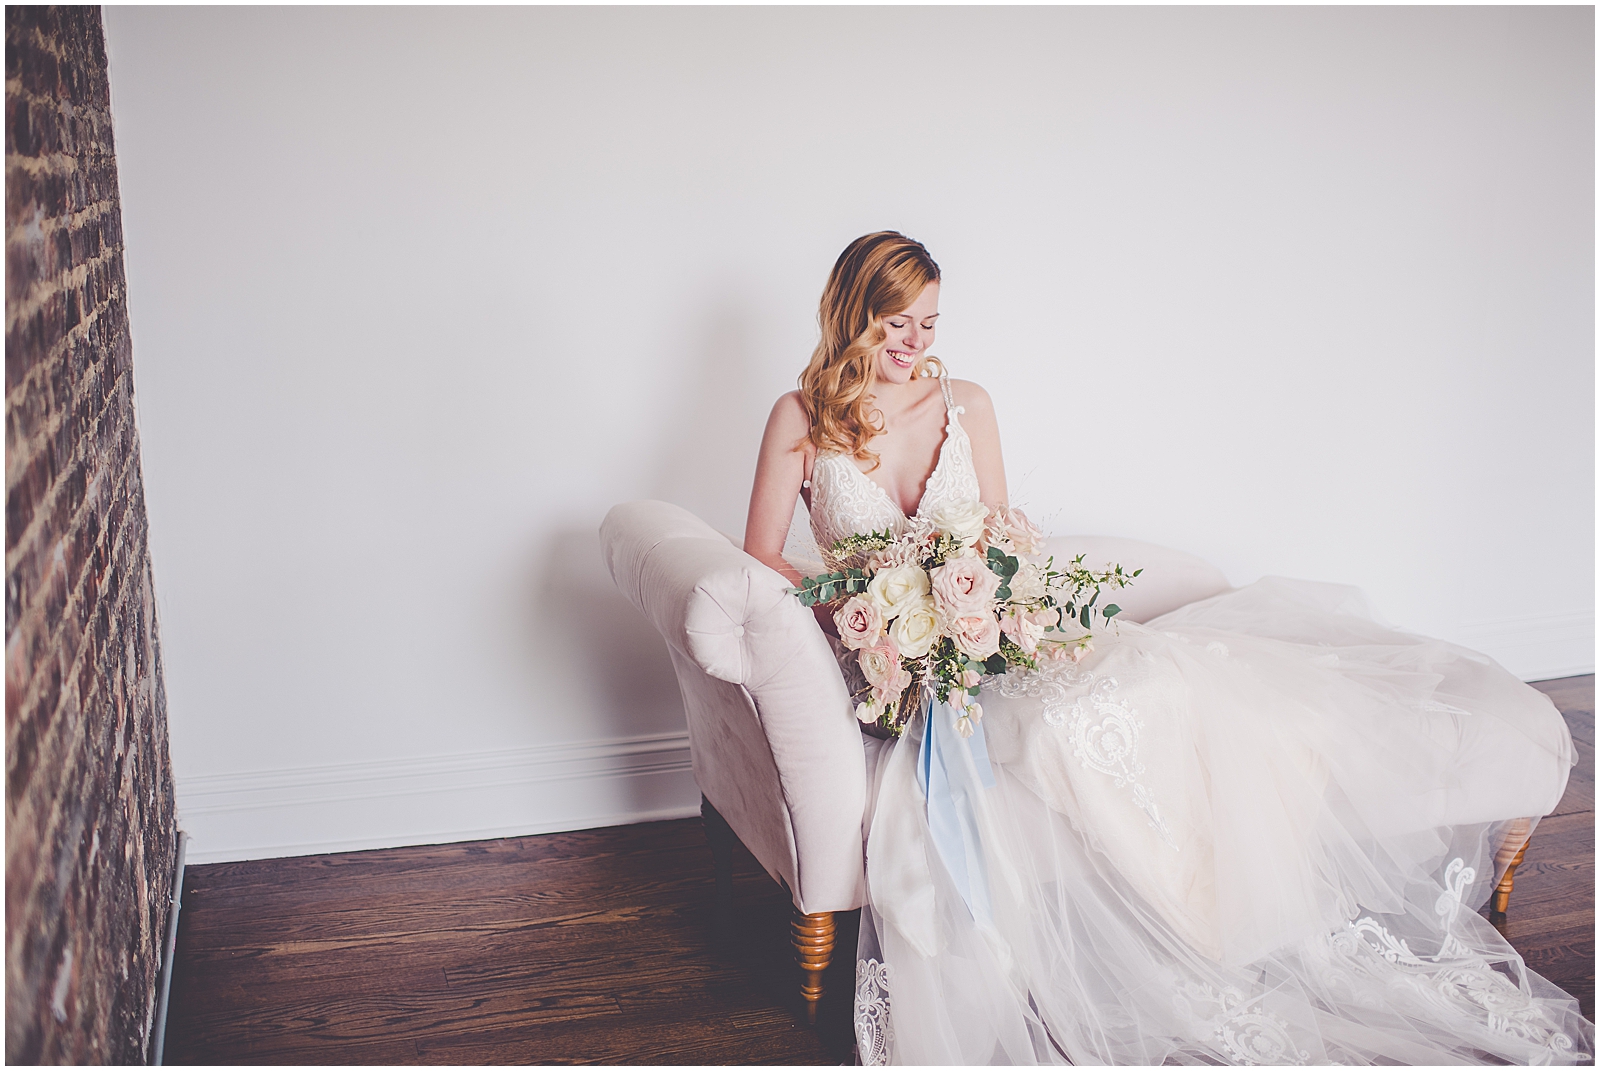 Top ten ways to have picture-perfect hair on your wedding with Megan Jarabe - guest blogger with Chicagoland wedding photographer Kara Evans Photographer.